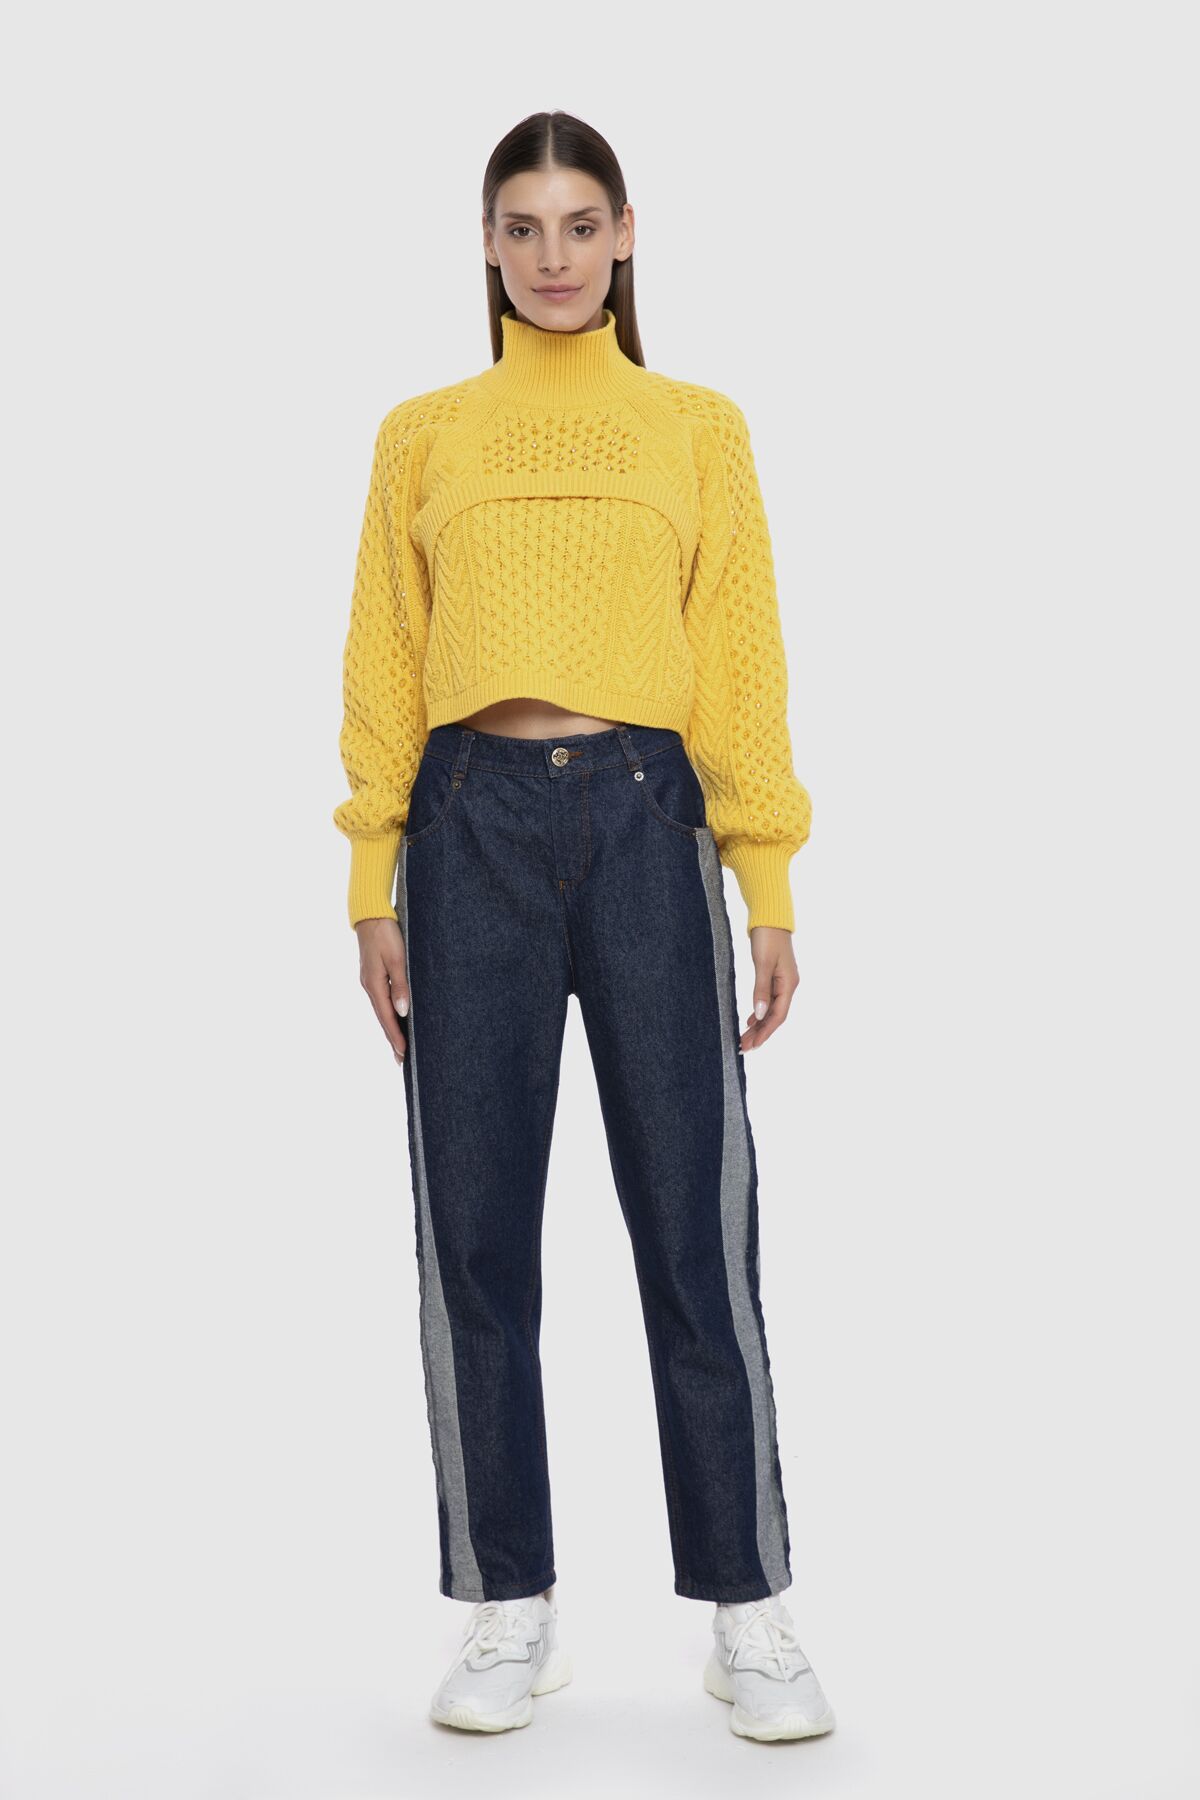  GIZIA - Two Piece Bead Embroidered Yellow Knitwear Sweater